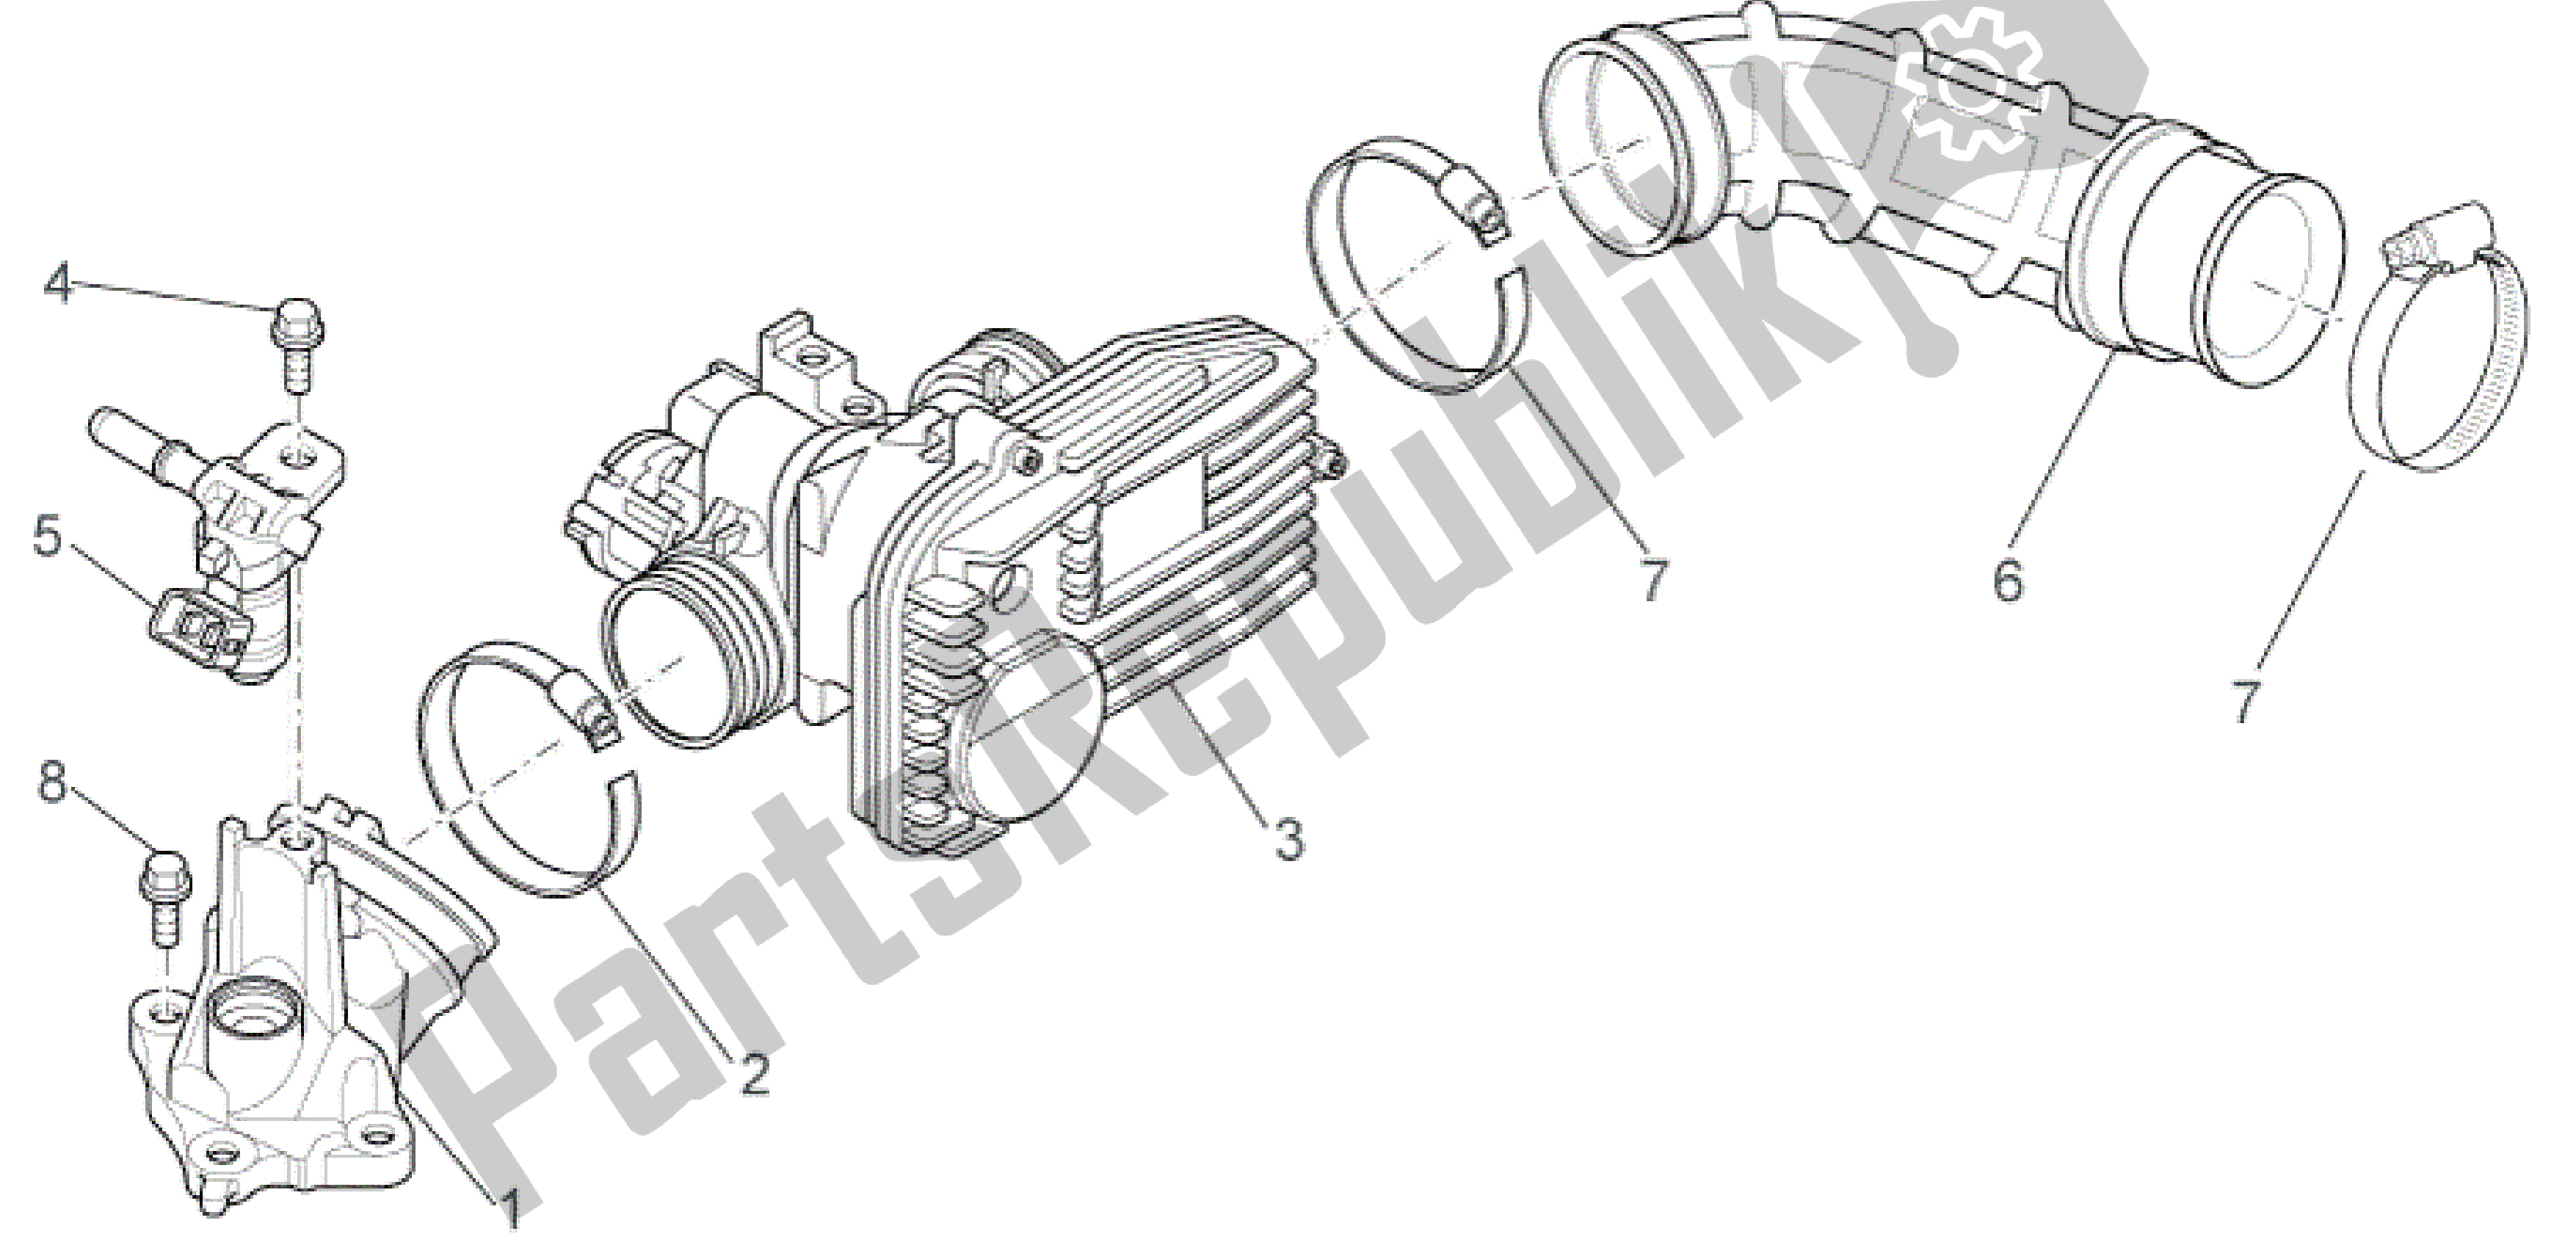 All parts for the Throttle Body of the Aprilia Sport City 250 2008 - 2010